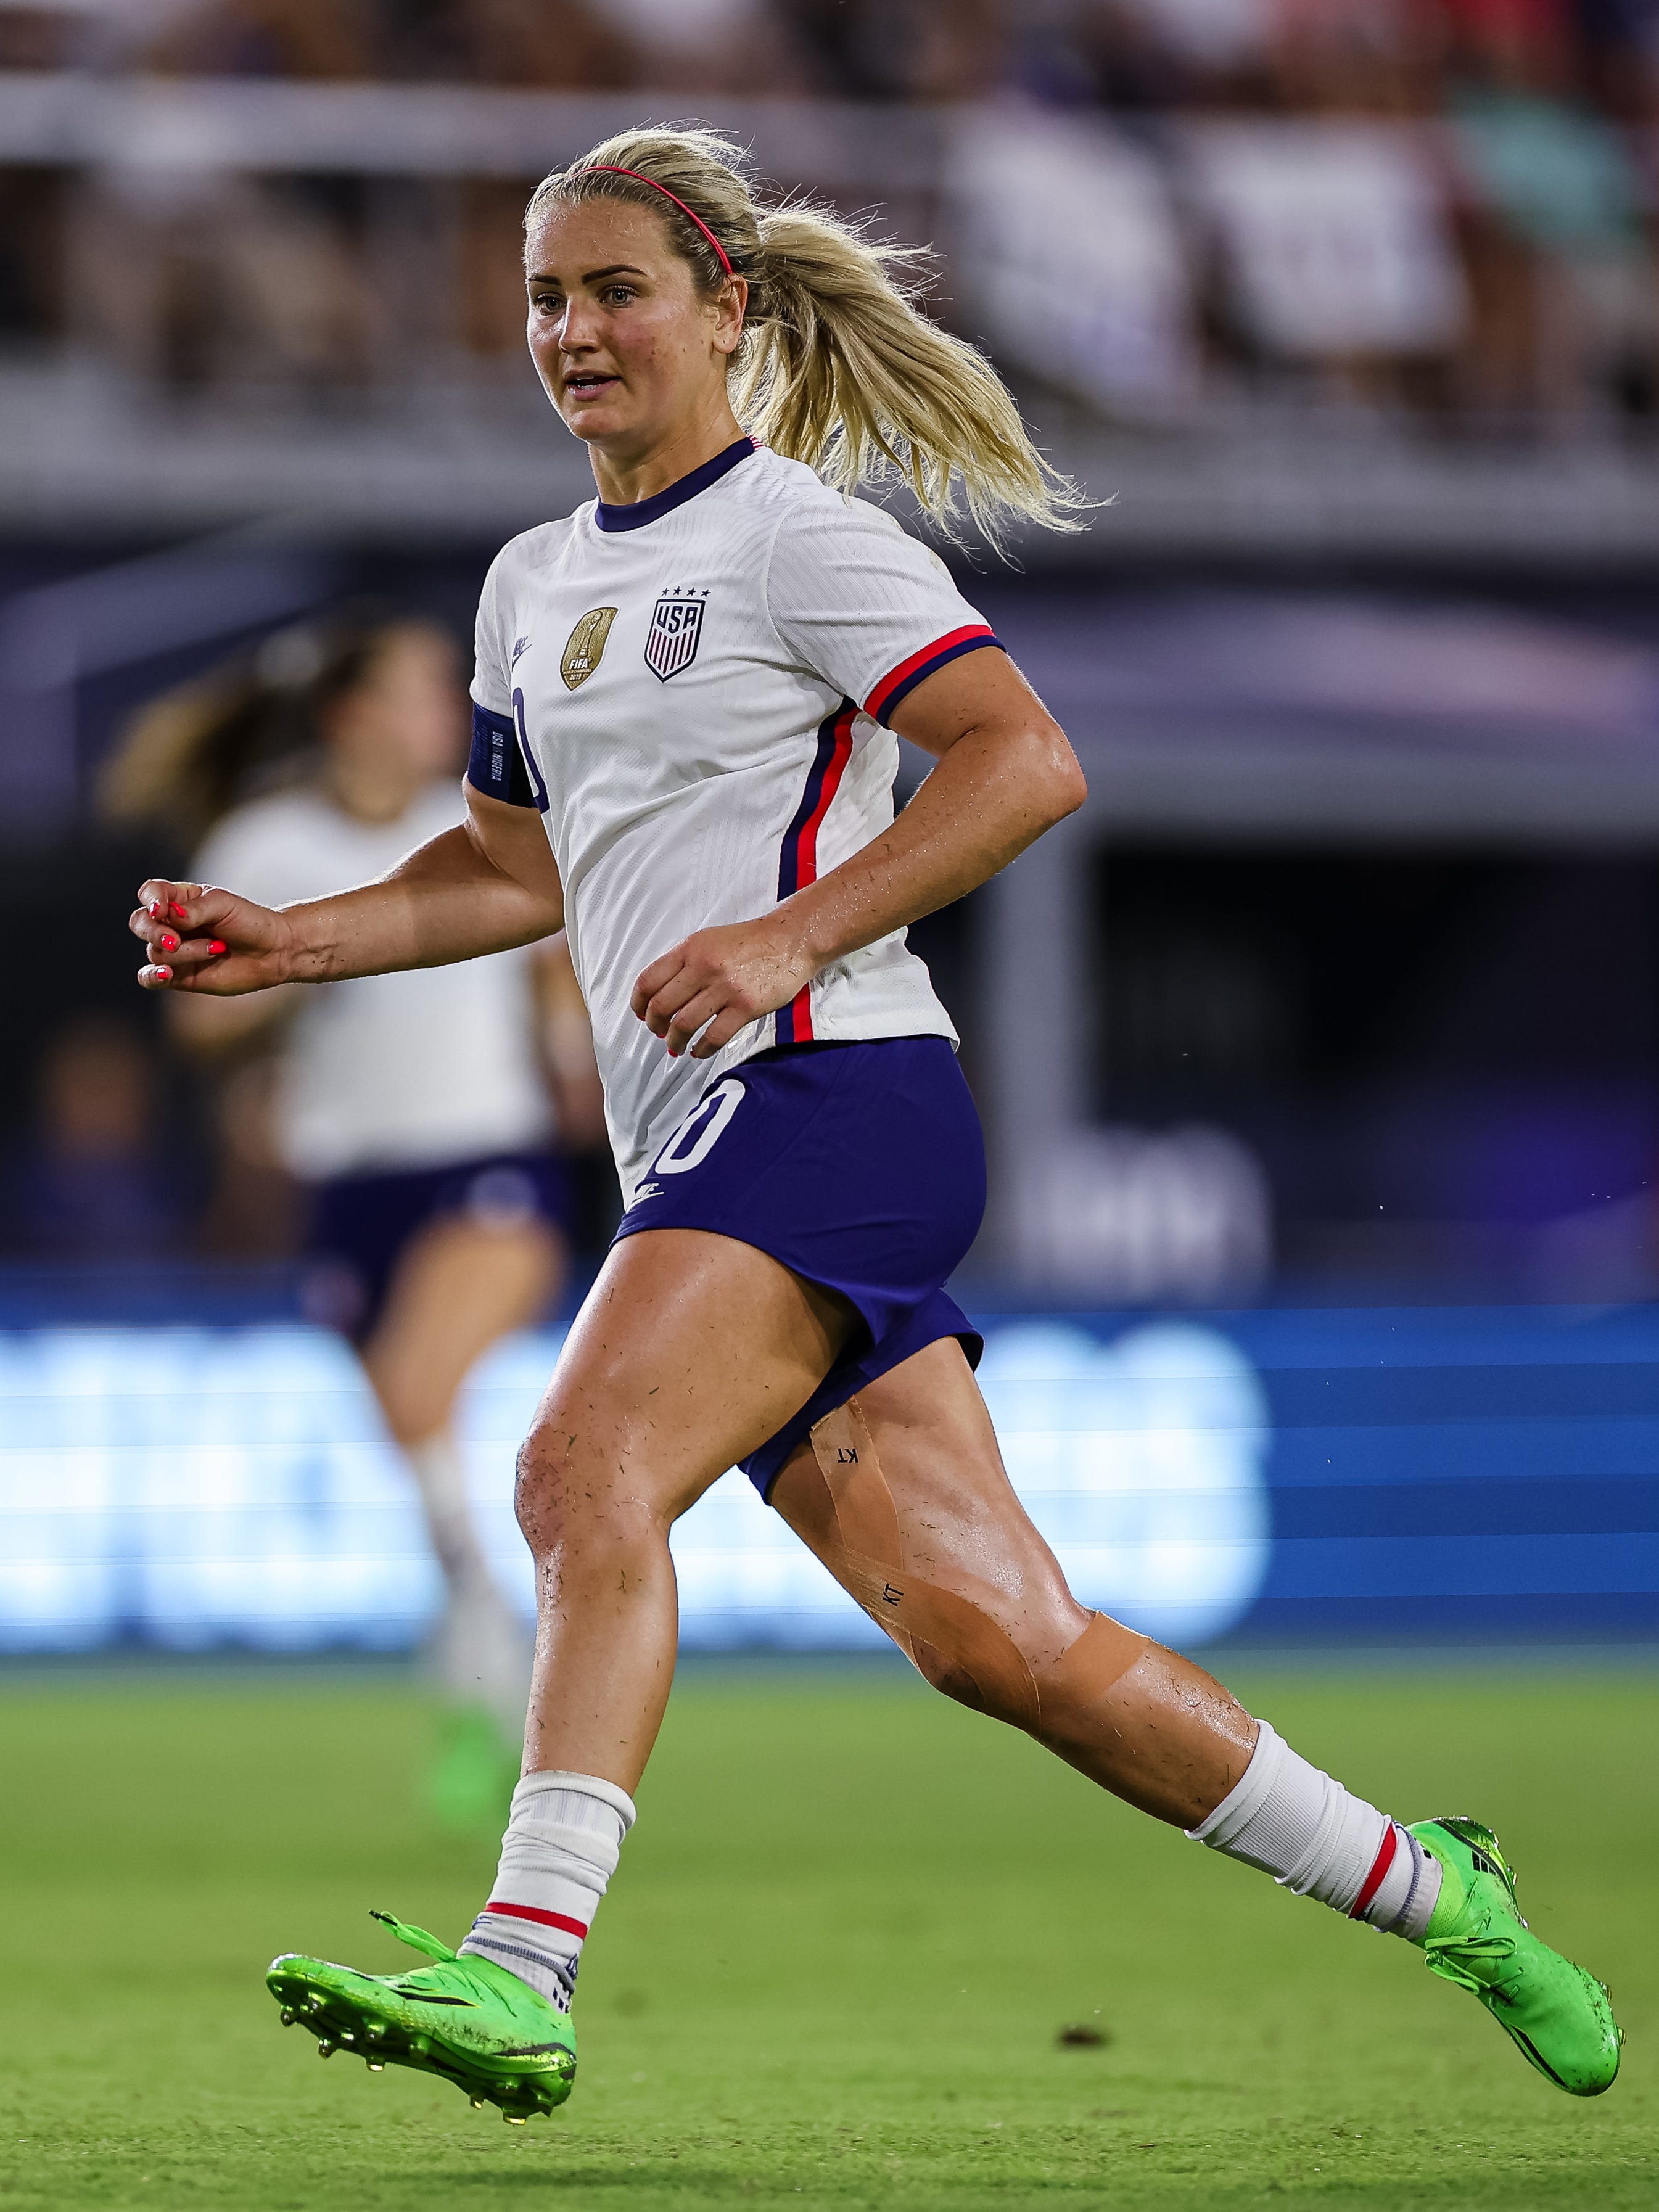 An action image of Lindsey Horan playing soccer.